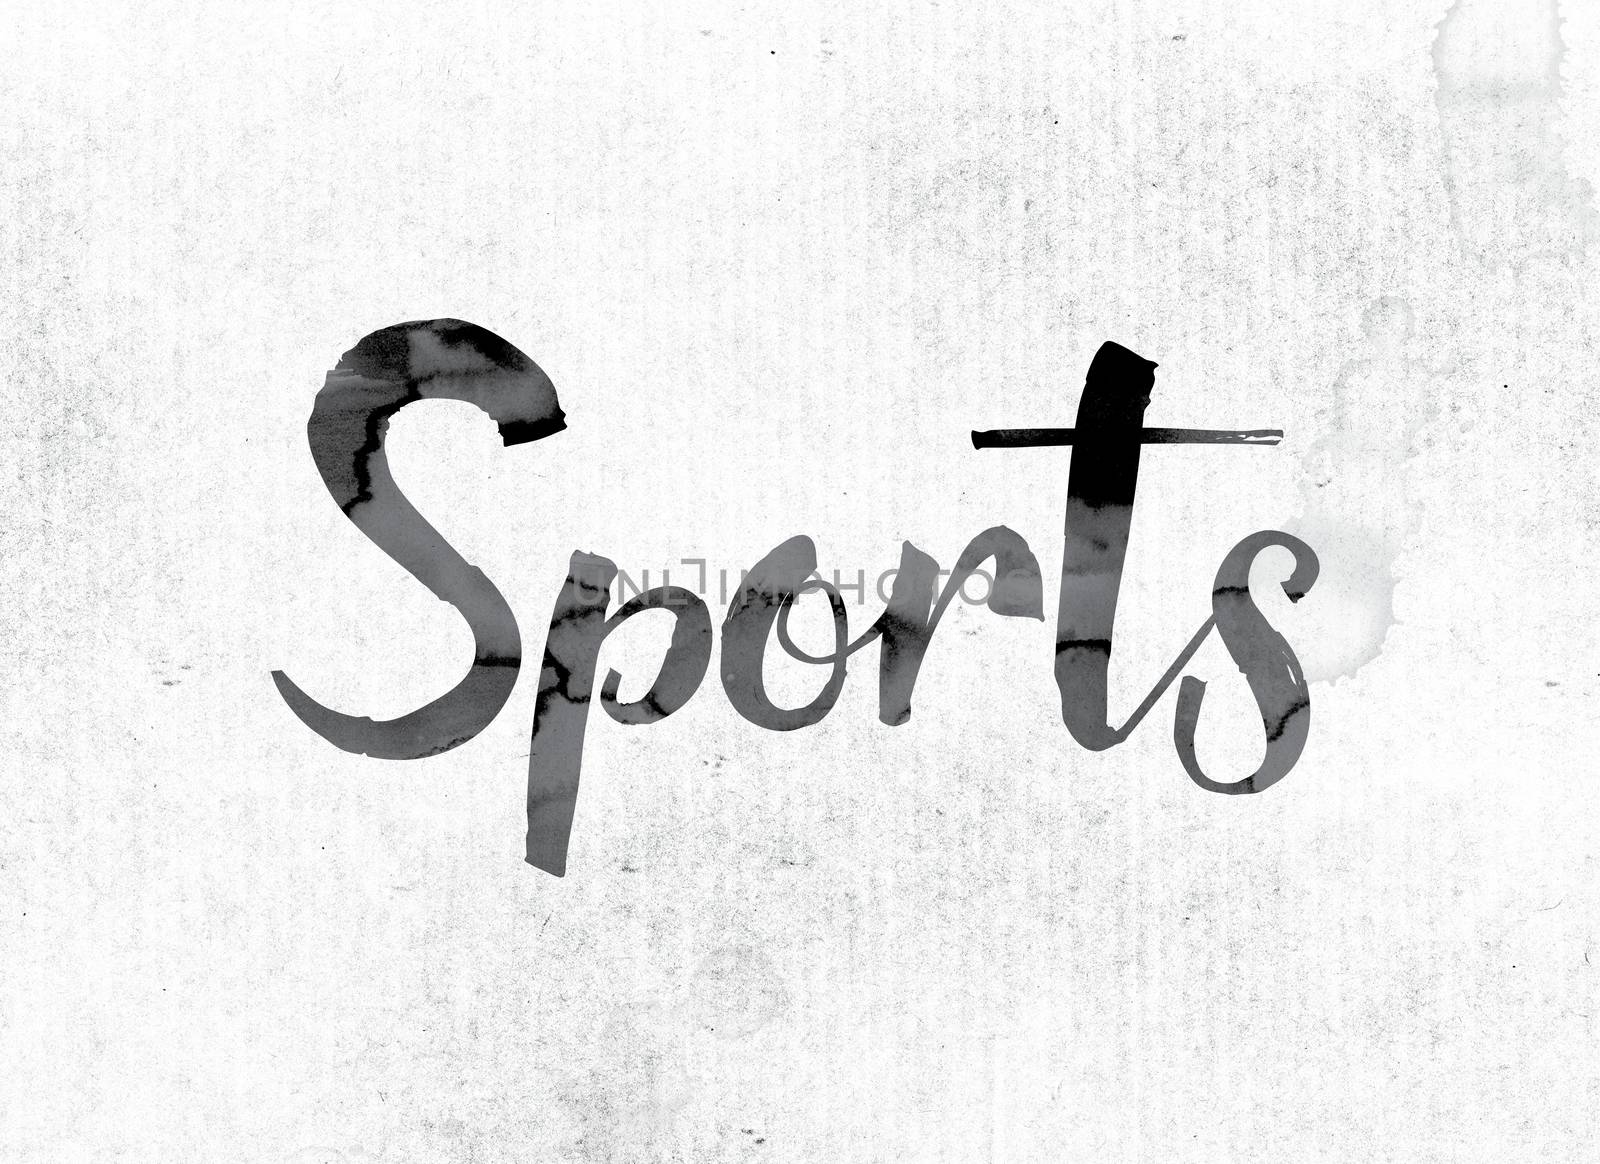 The word "Sports" concept and theme painted in watercolor ink on a white paper.